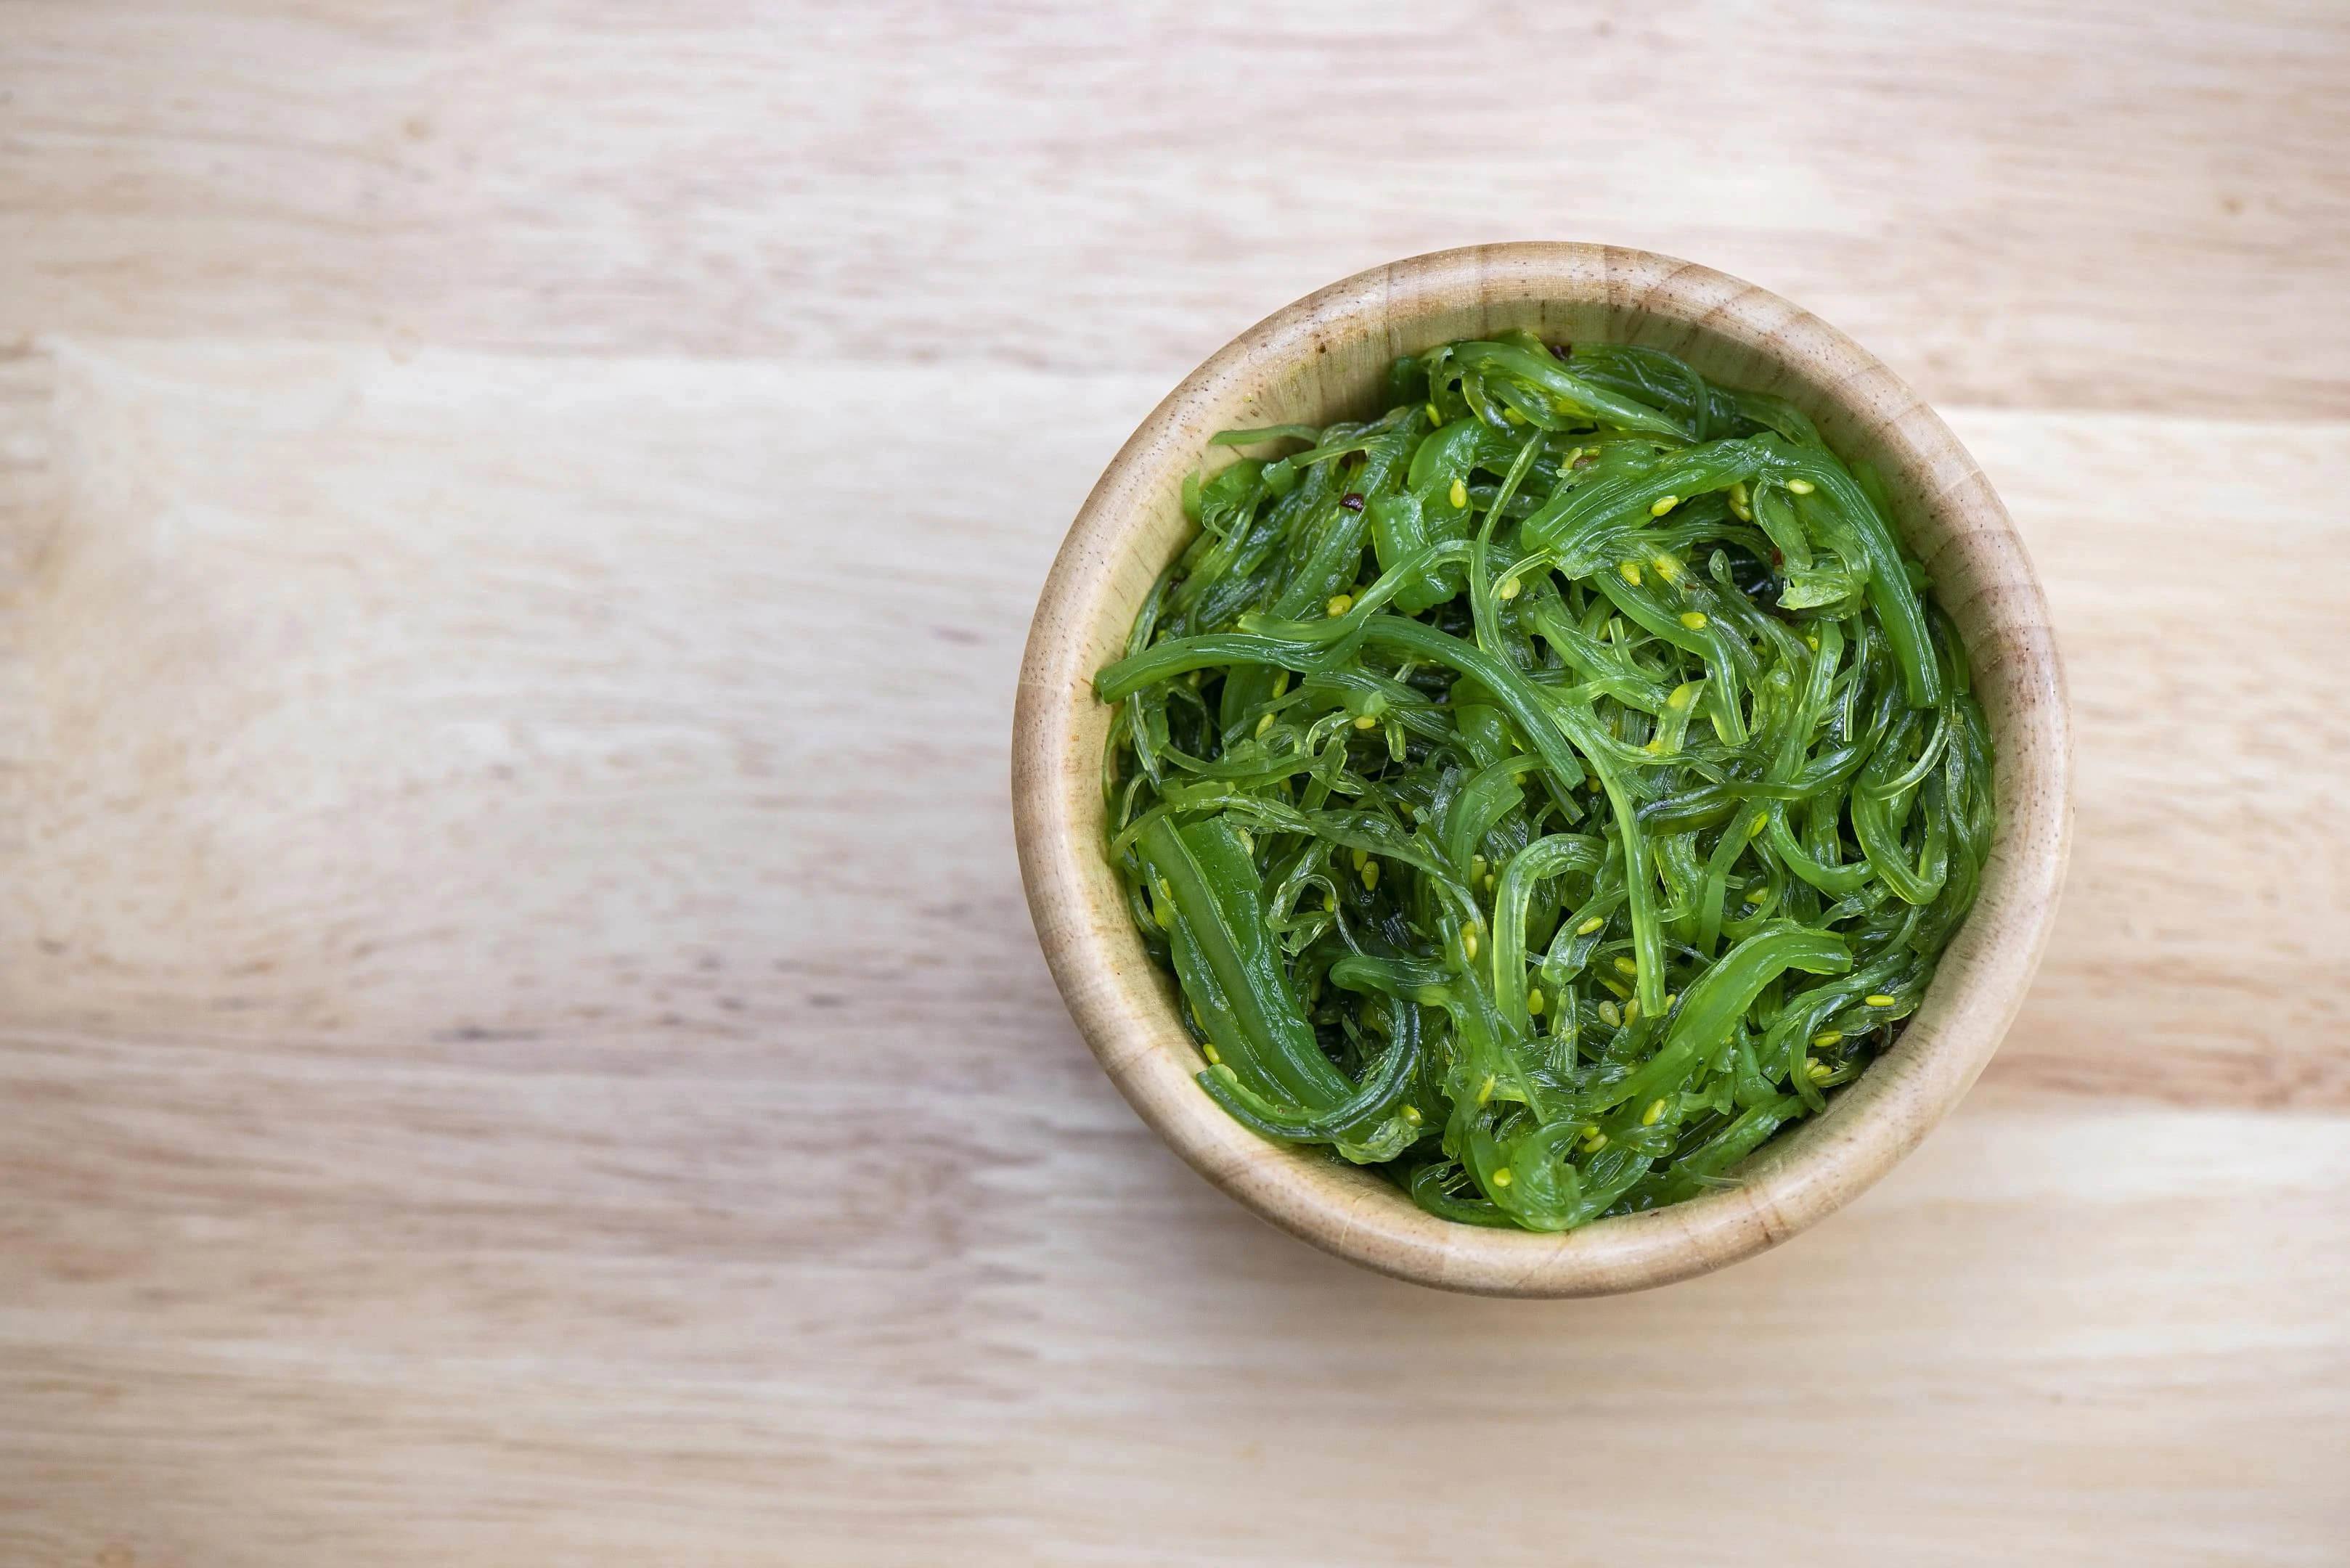 Seaweed salad in wooden bowl on wooden table